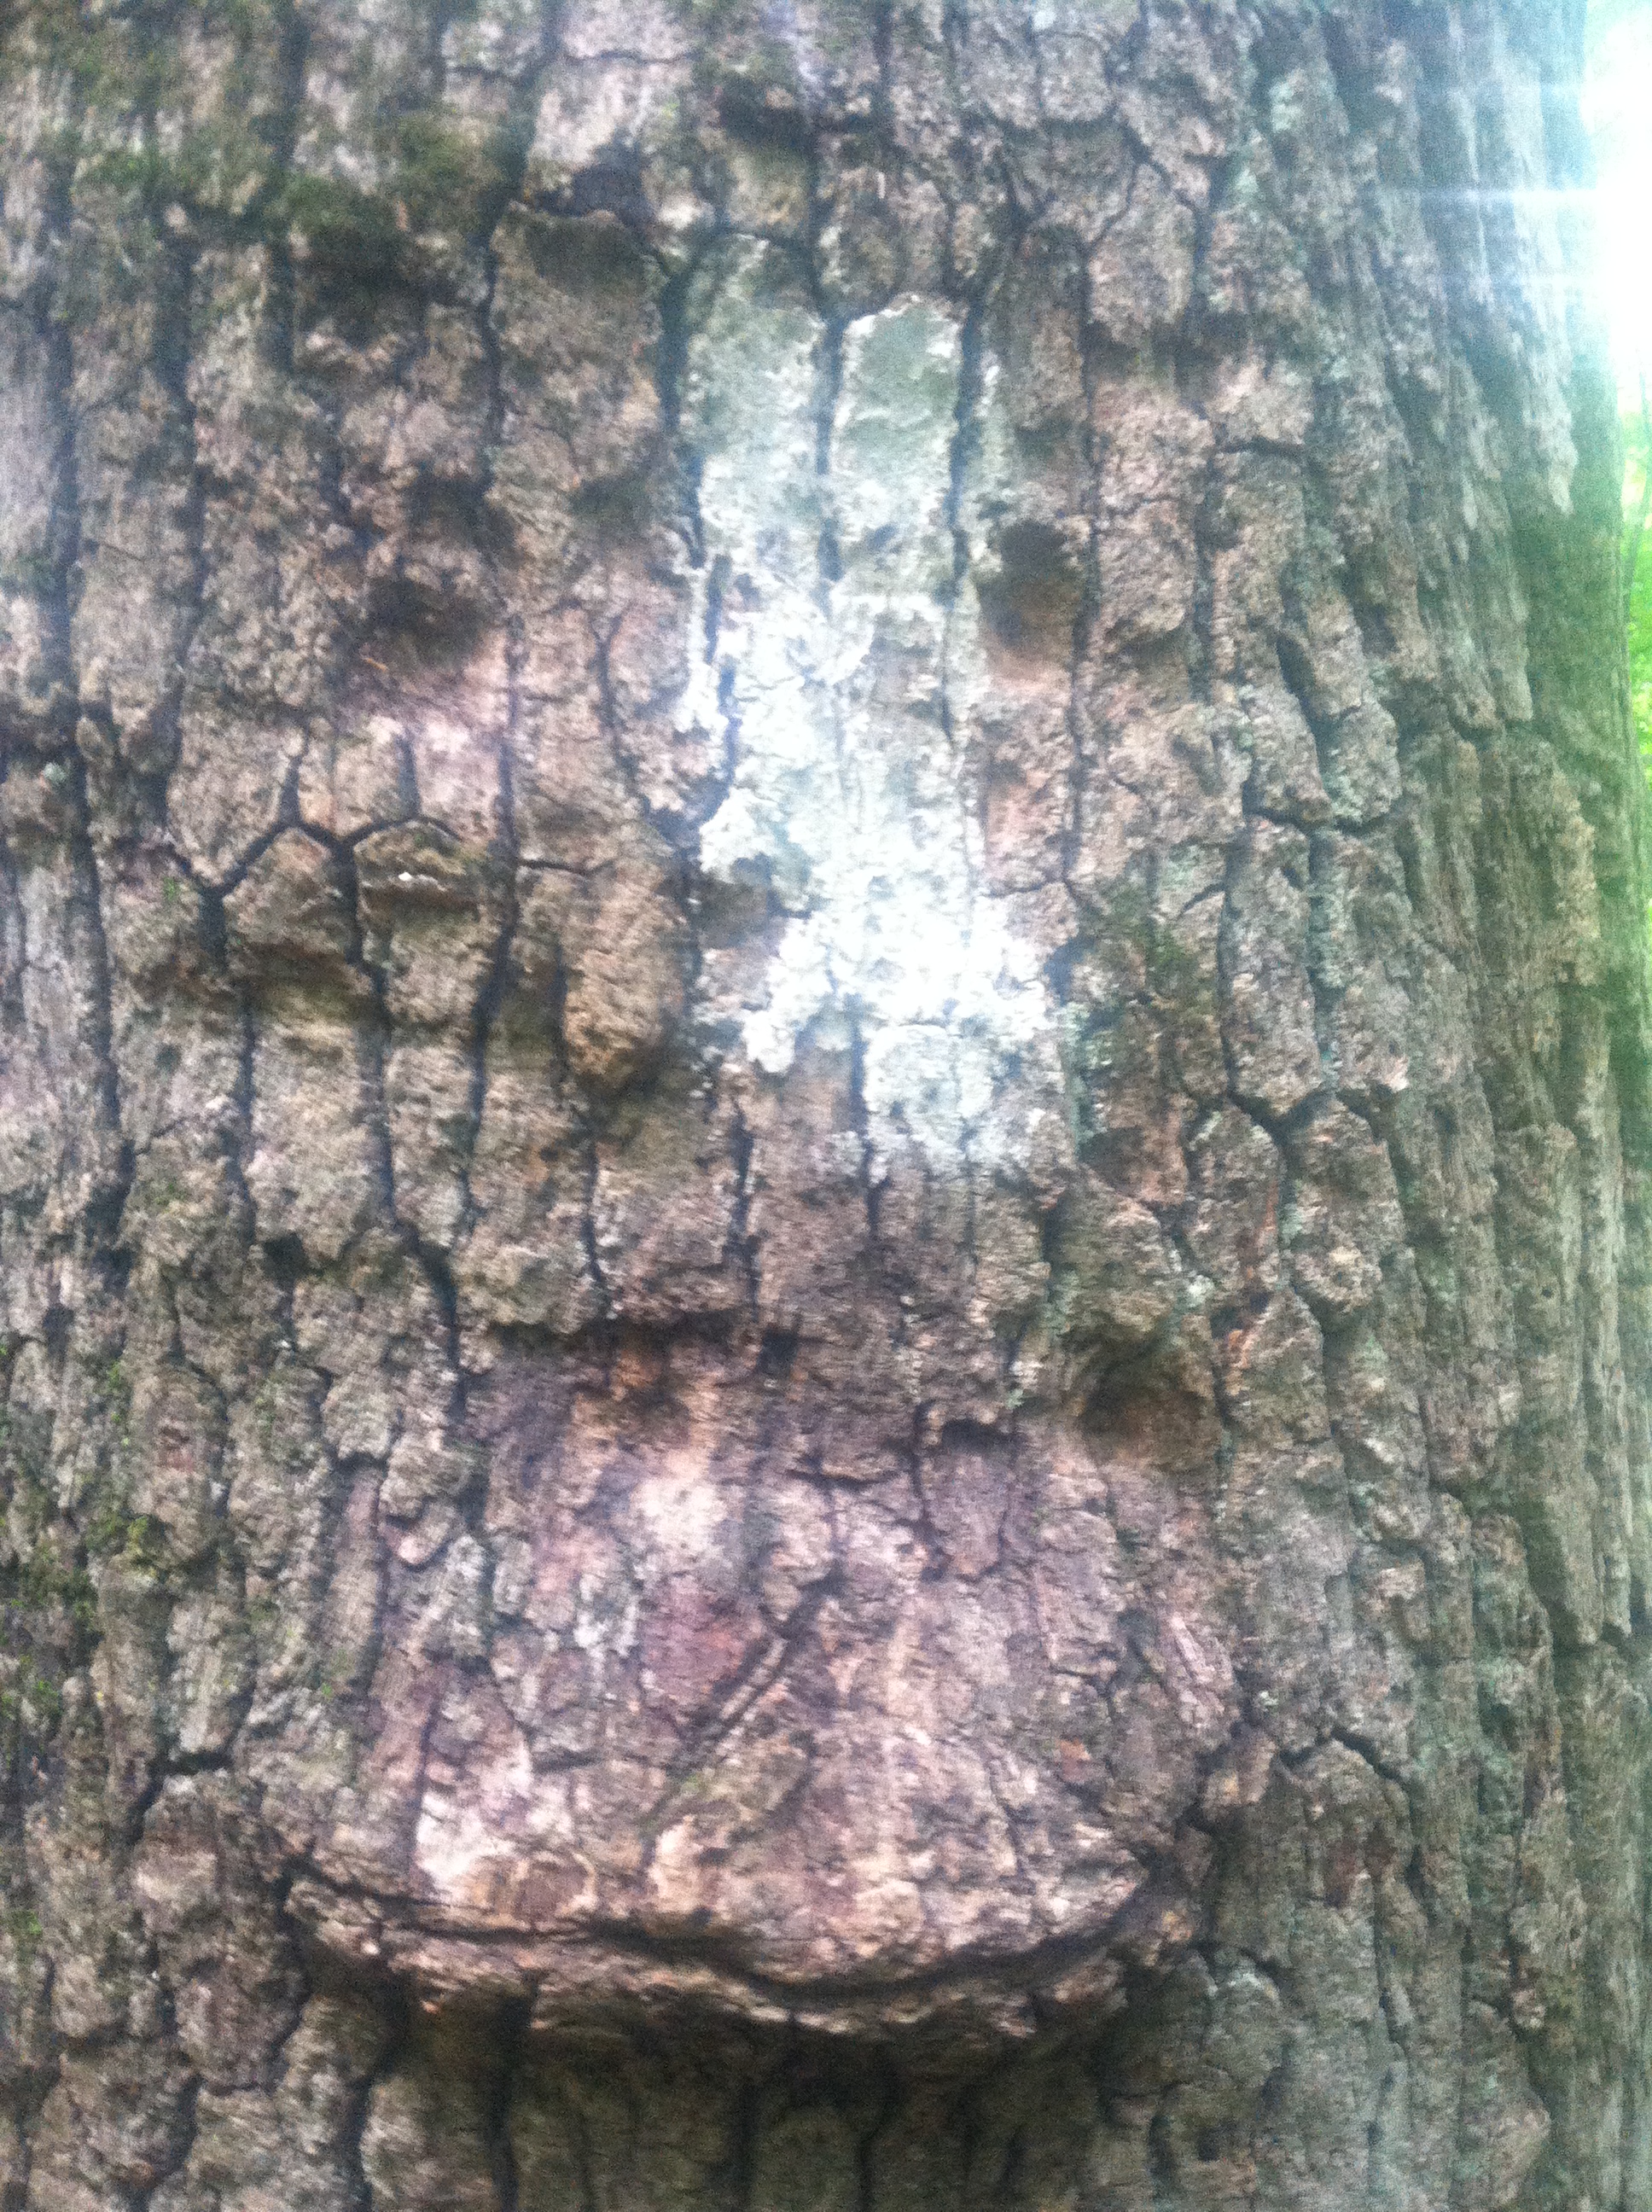 tree that sort of looks like it has a face growing out of it in the Mohican 100 Marathon